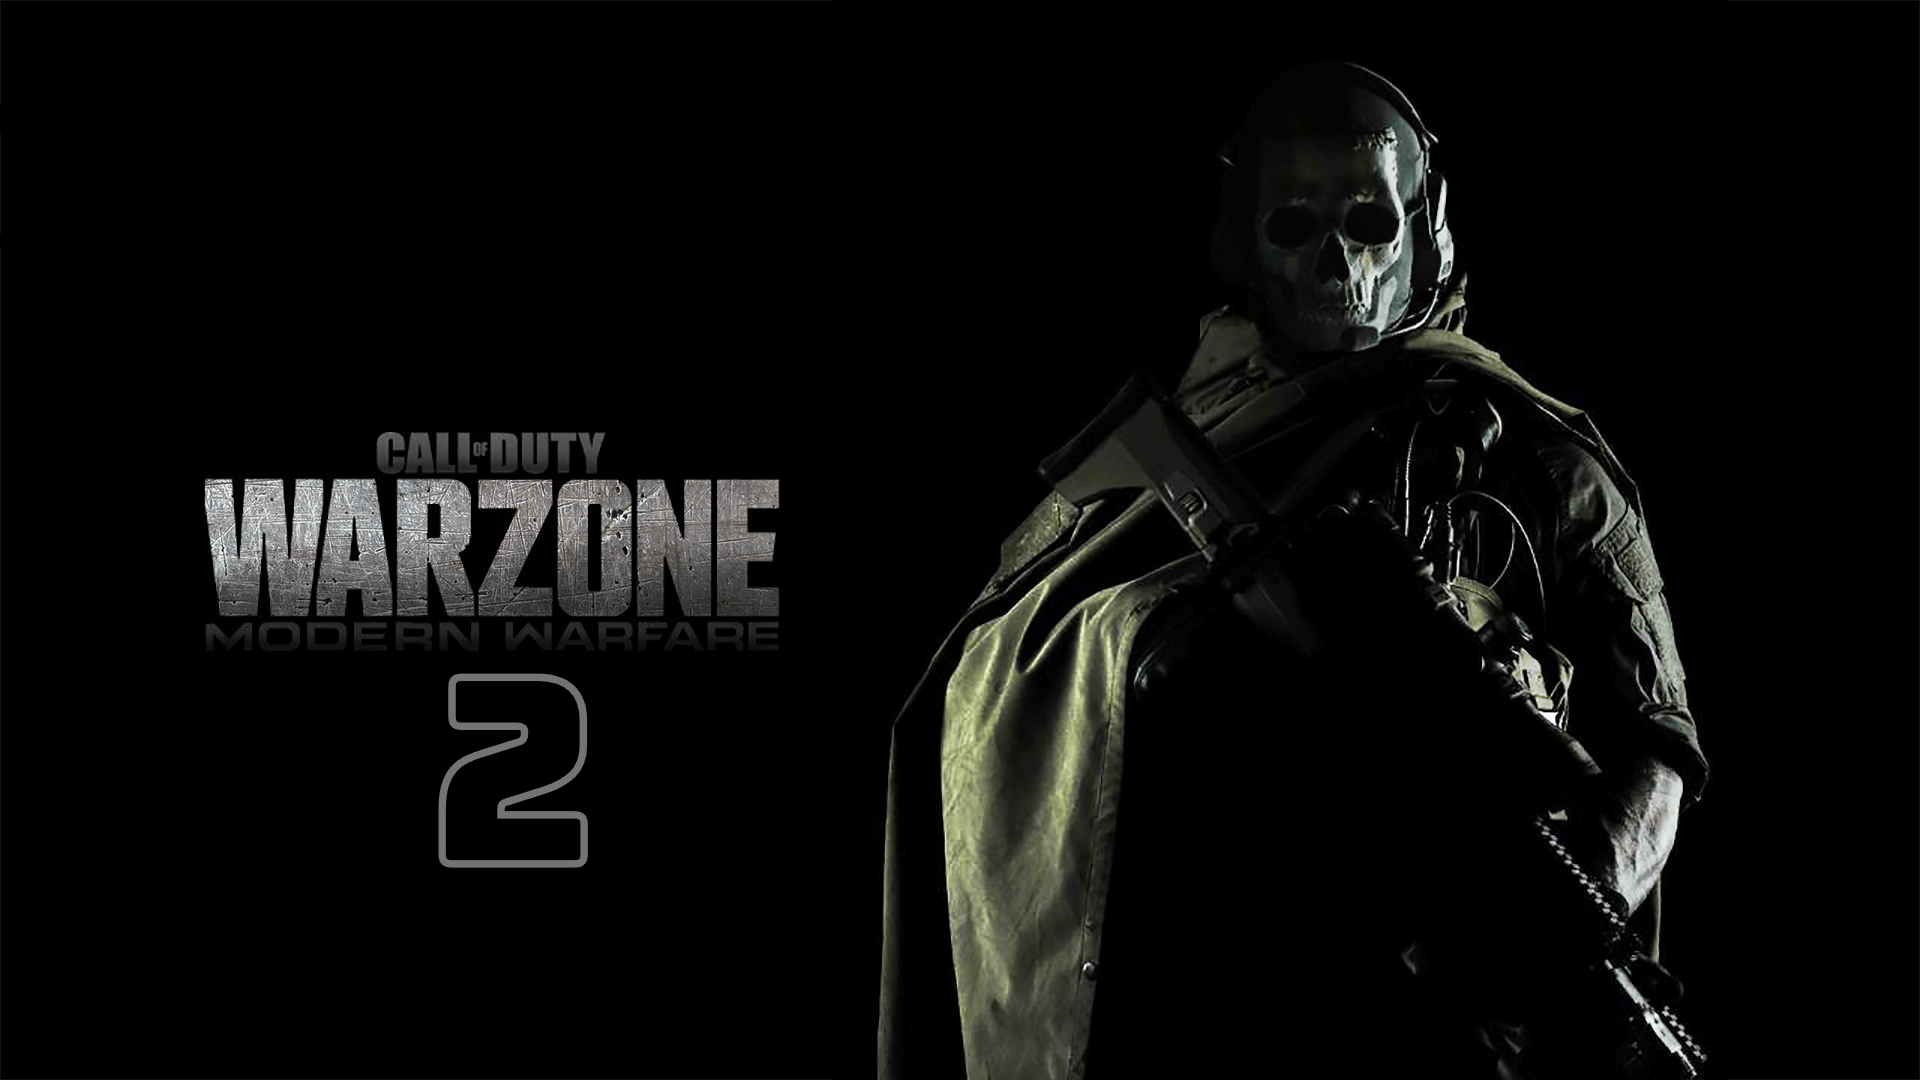 5 new features for Warzone 2

